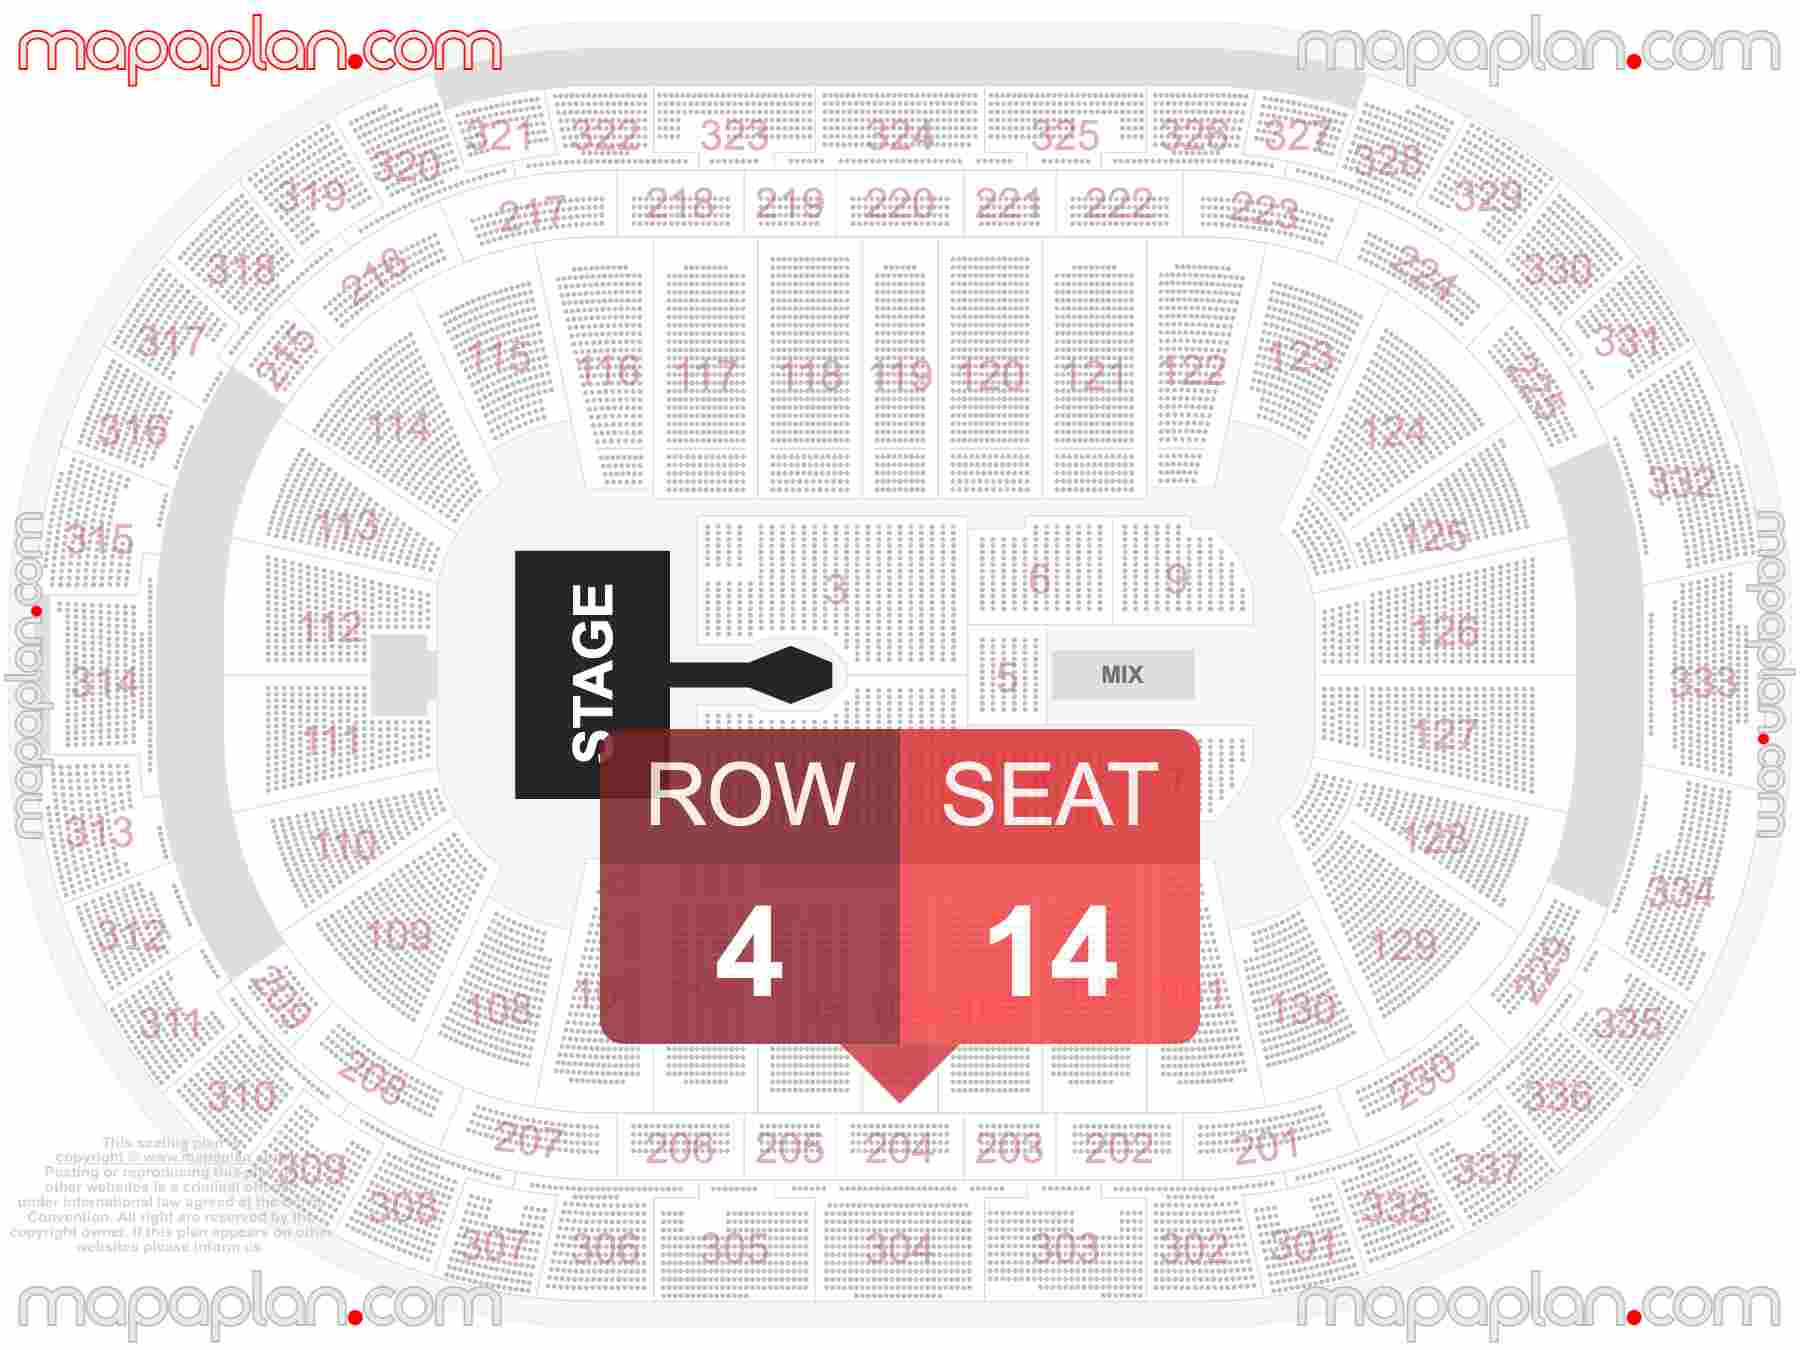 Raleigh PNC Arena seating chart Concert with extended catwalk runway B-stage seating chart with exact section numbers showing best rows and seats selection 3d layout - Best interactive seat finder tool with precise detailed location data